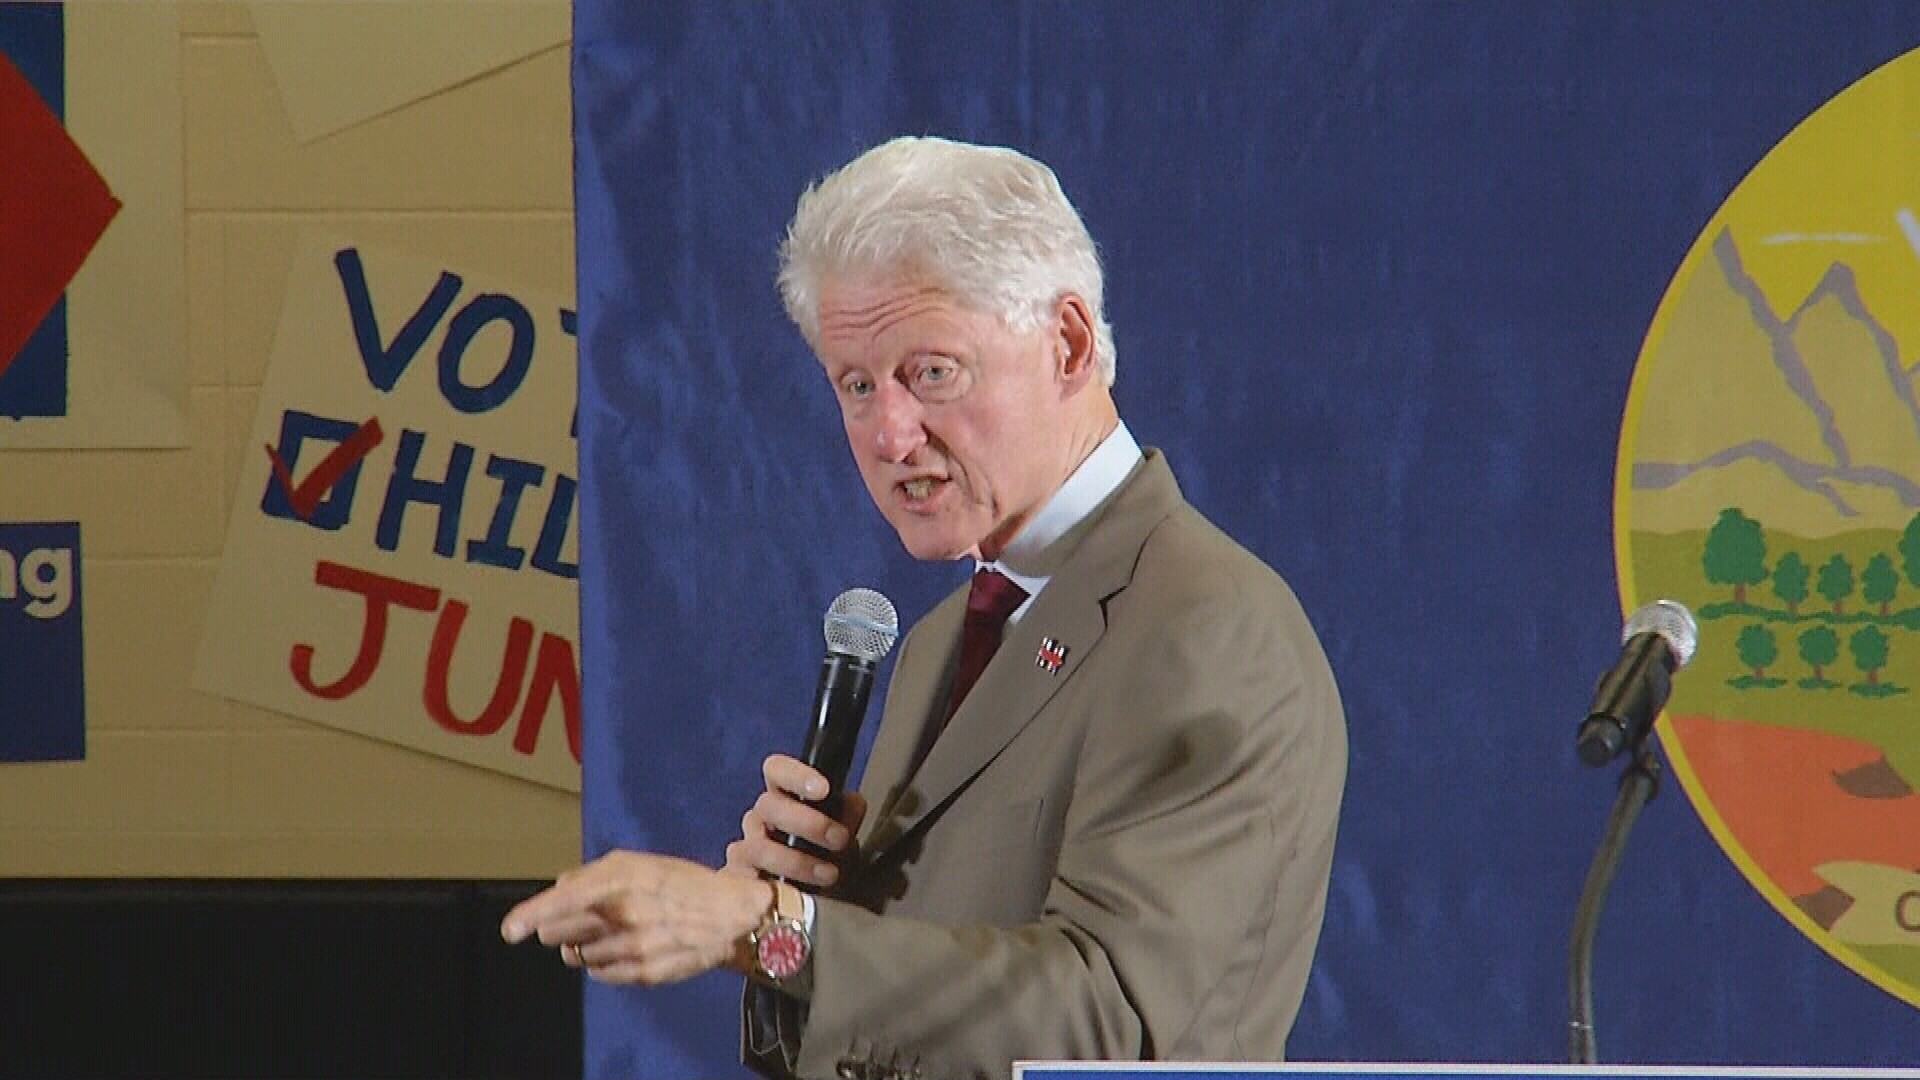 President Bill Clinton spoke for more than an hour at Will James Middle School in Billings